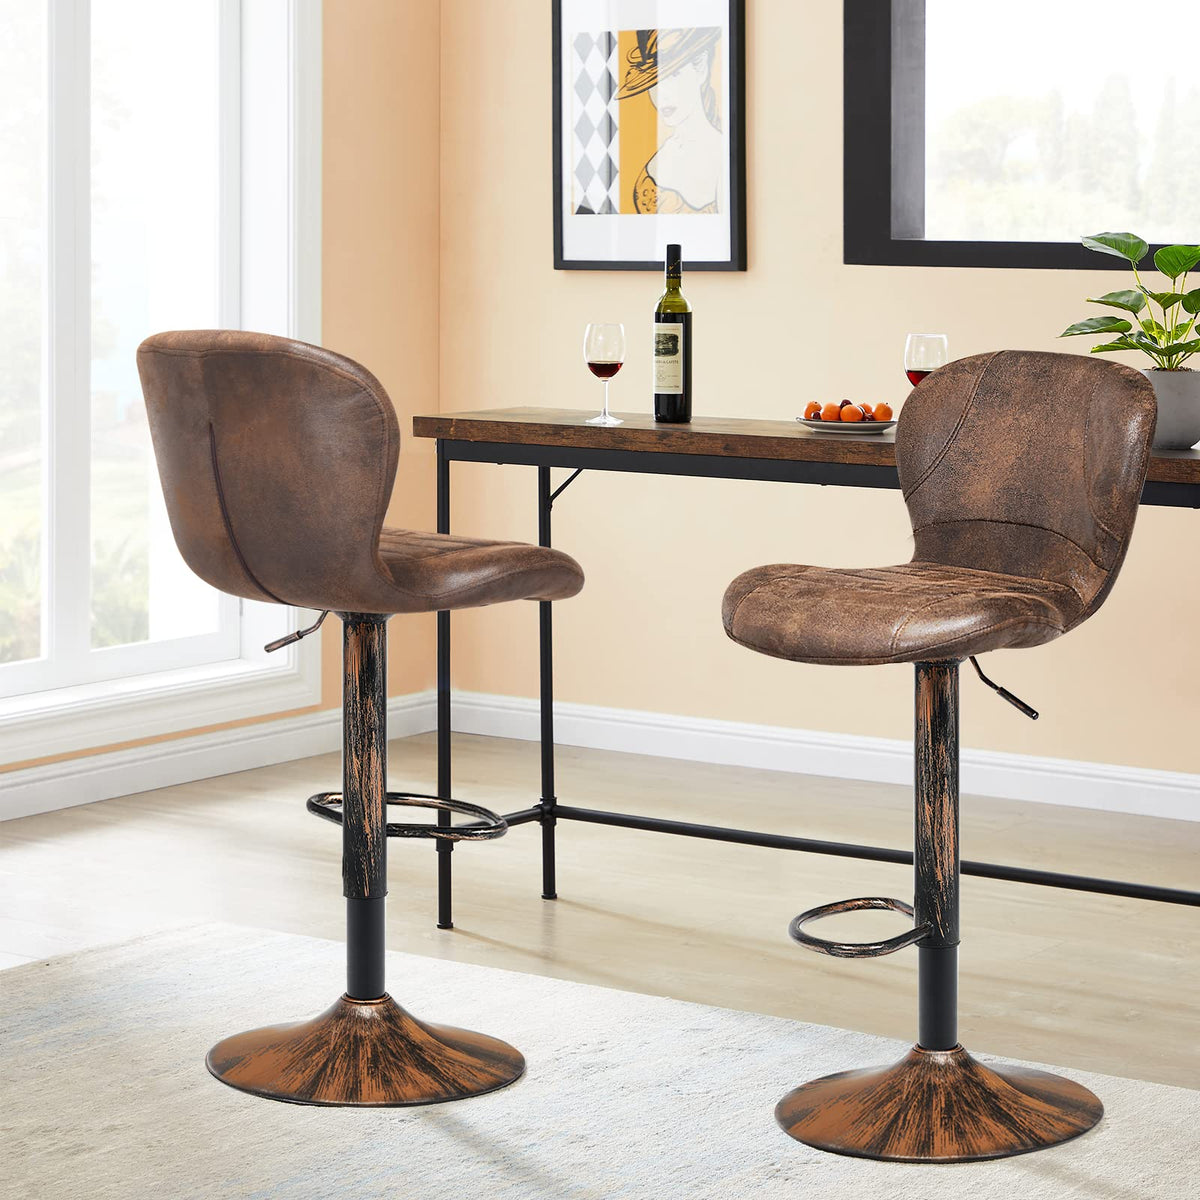 Giantex Bar Stools Set of 2, Adjustable Swivel Barstools with Back, Hot-Stamping Cloth and Chrome Footrest, Retro Brown